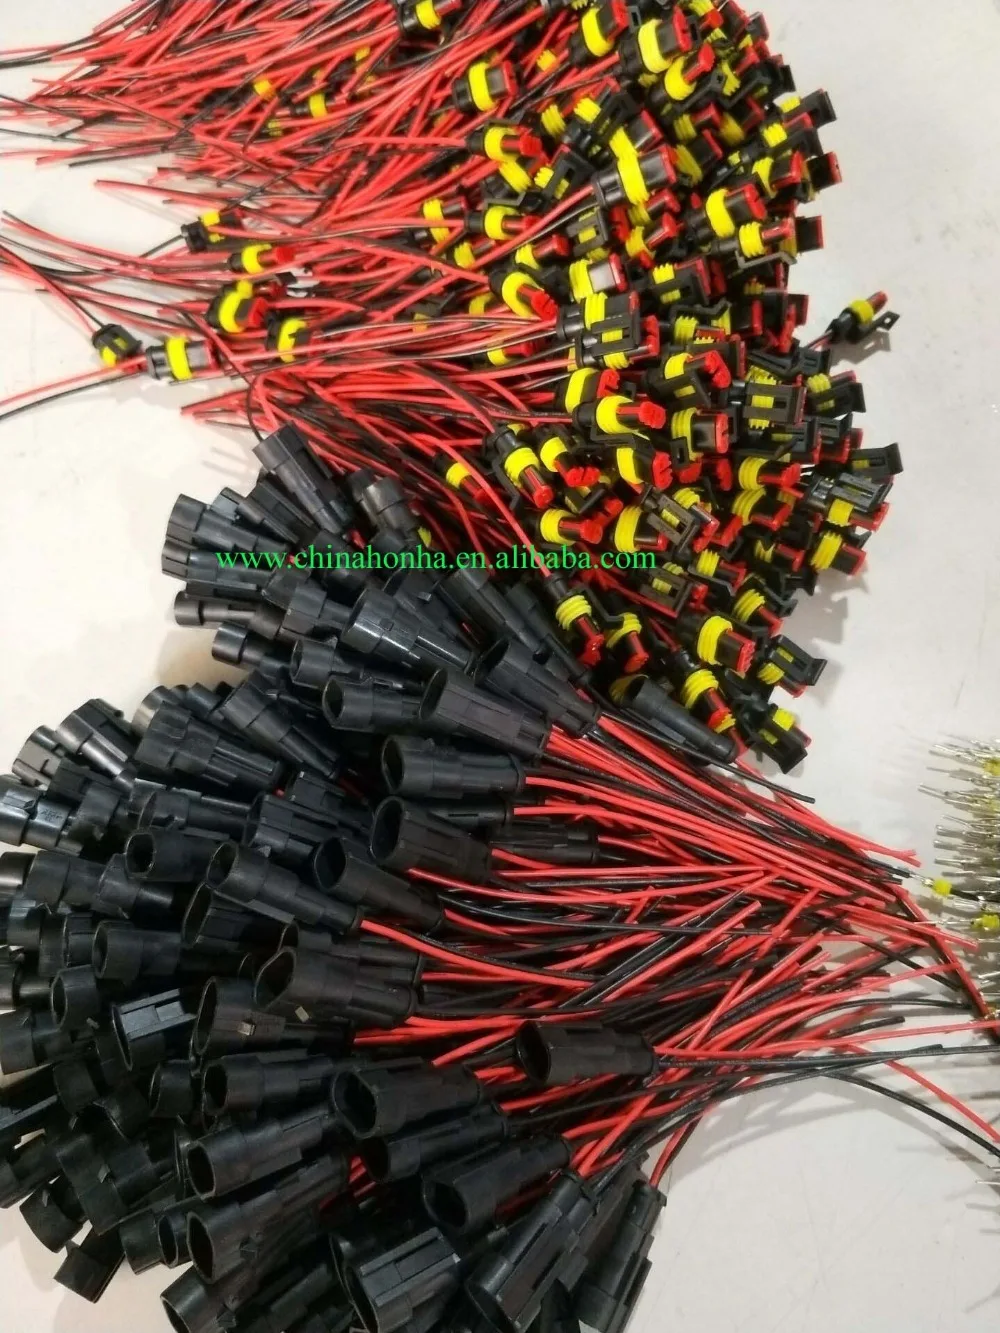 10 pcs 2 pin Tyco AMP 1.5 series connector waterproof wire 1.5mm connector plug car xenon wire harness pigtail